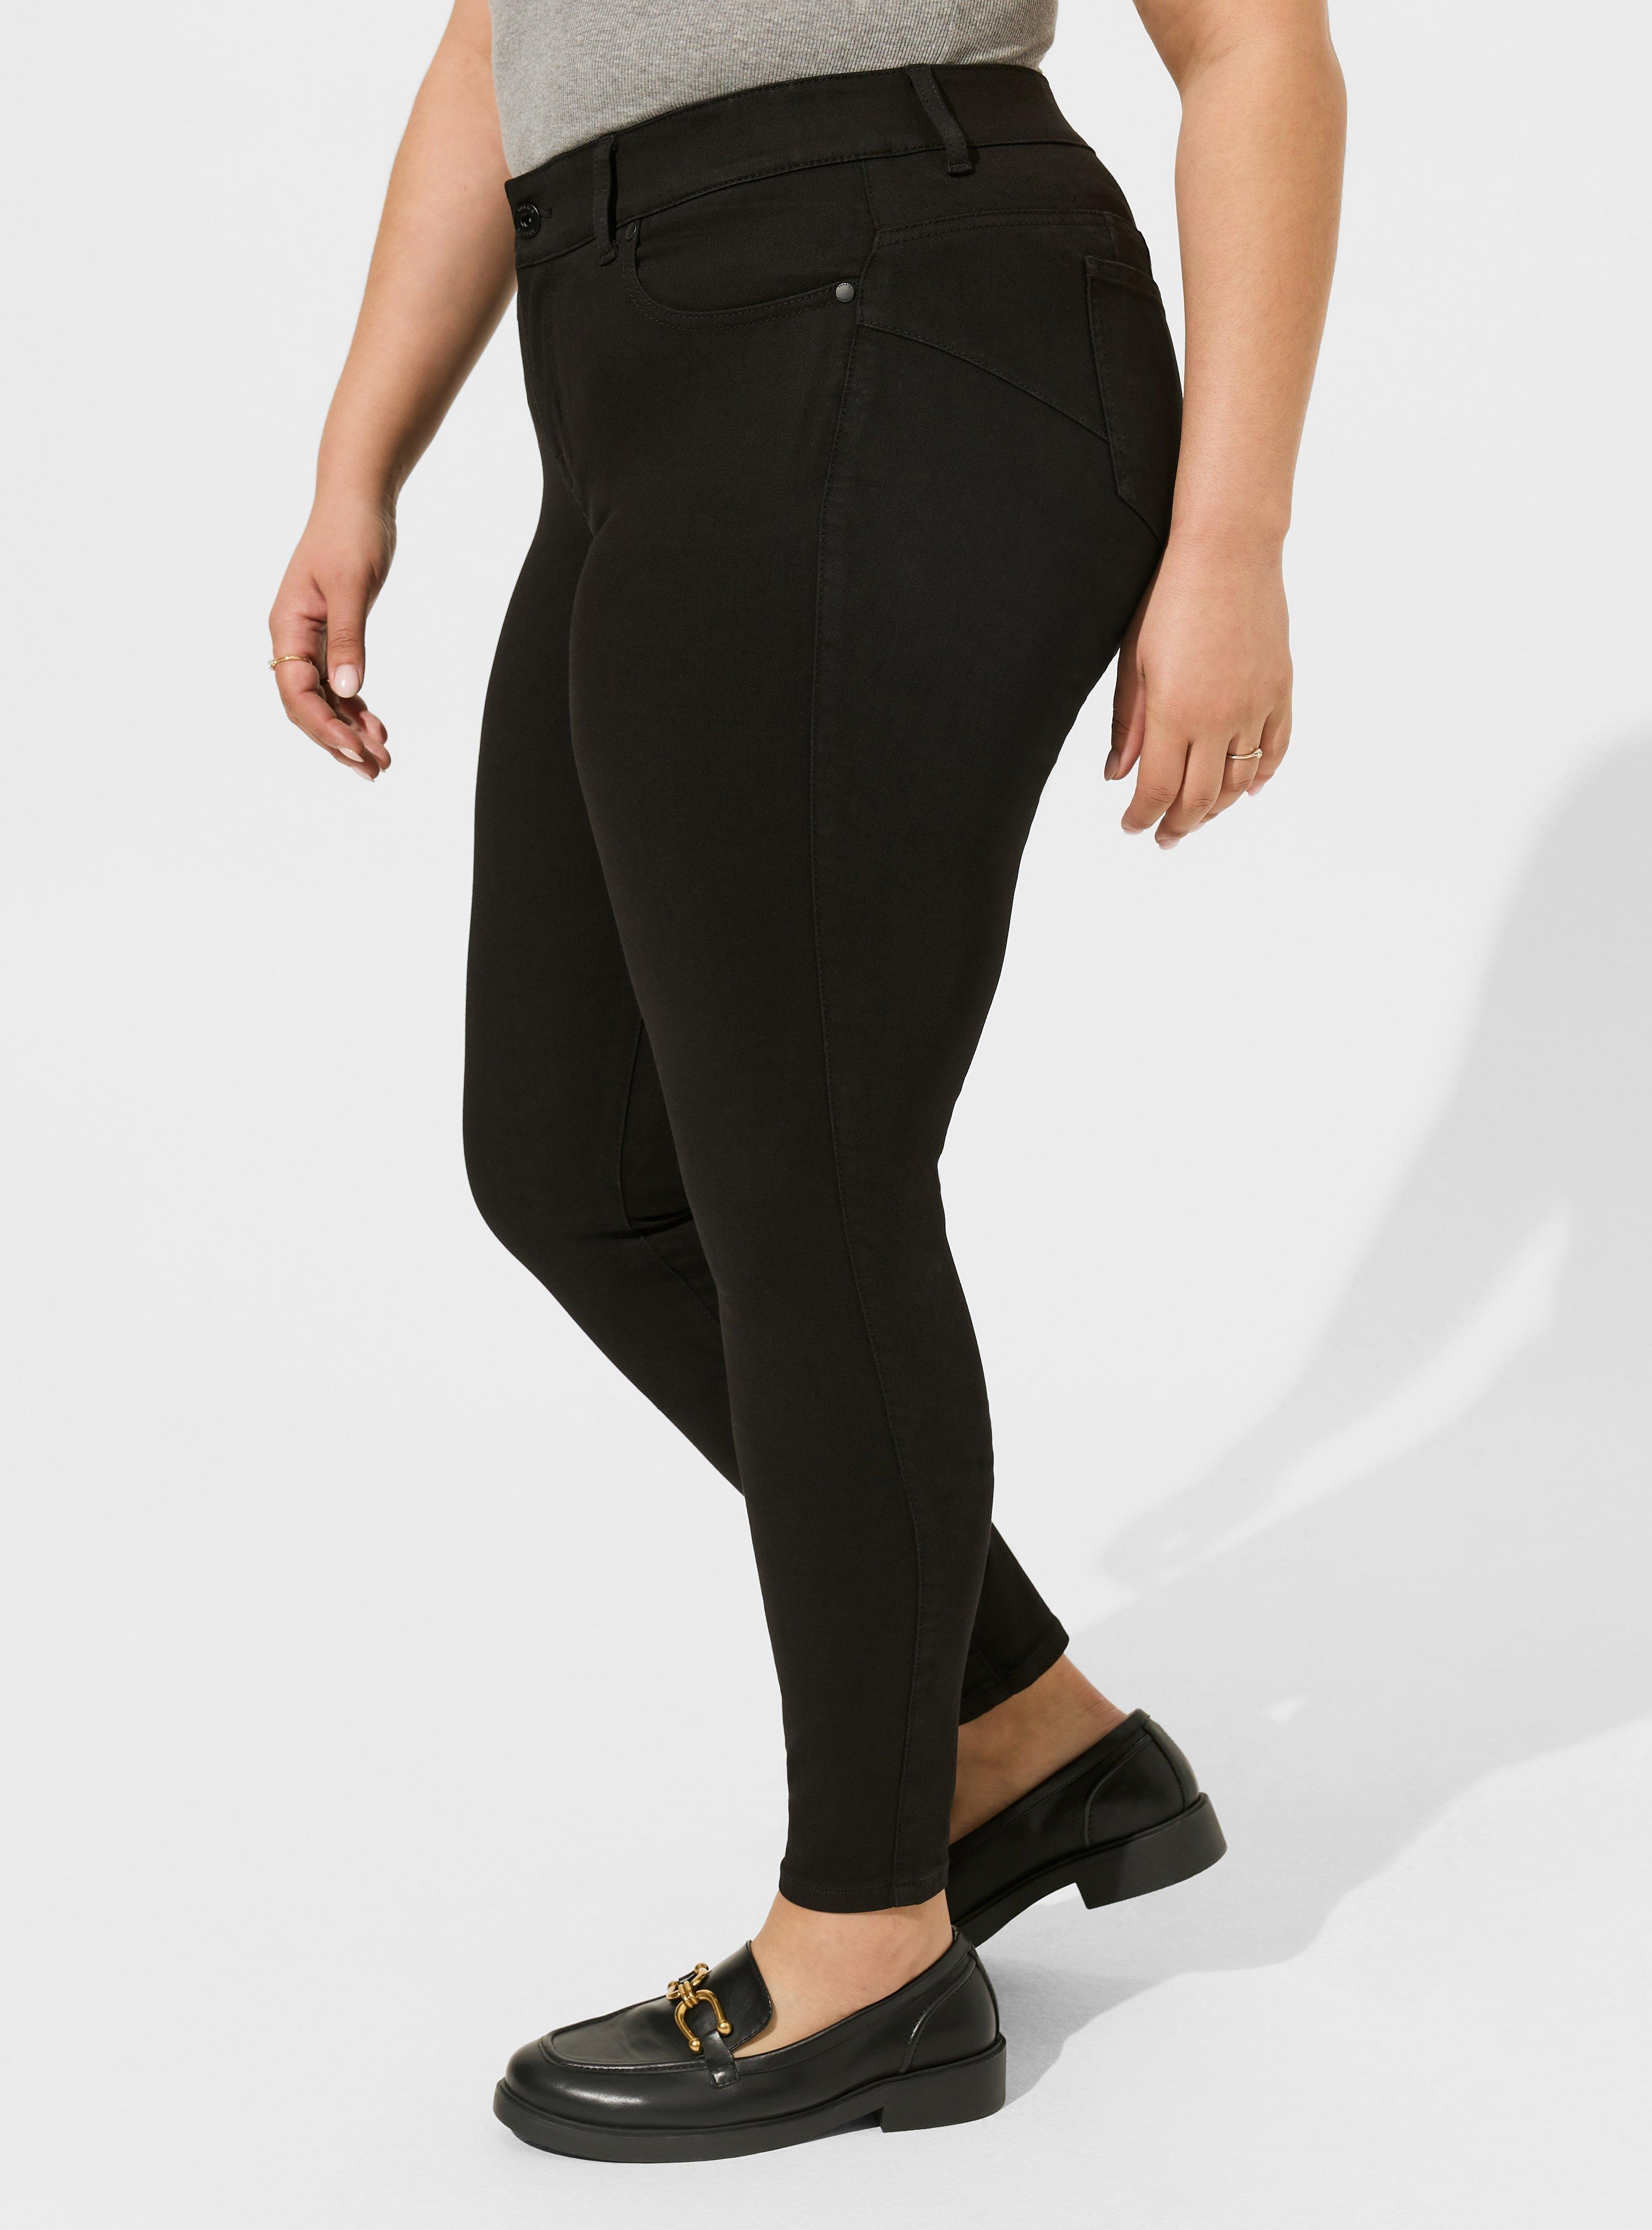 Buy the Premium Seriously Stretchy High-Rise Jegging